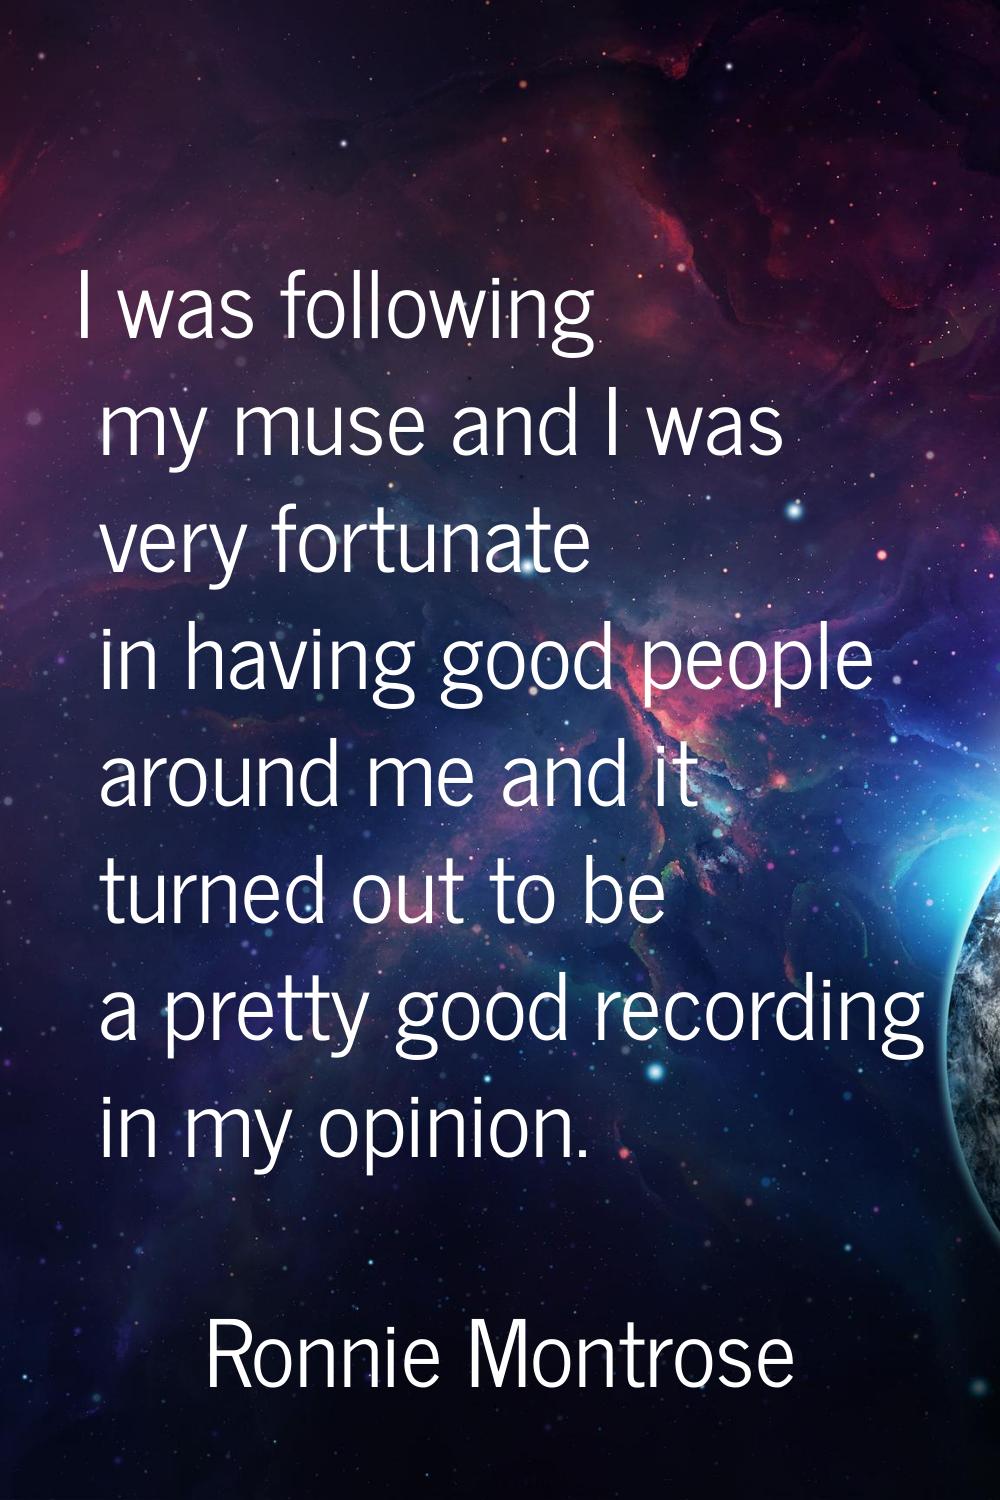 I was following my muse and I was very fortunate in having good people around me and it turned out 